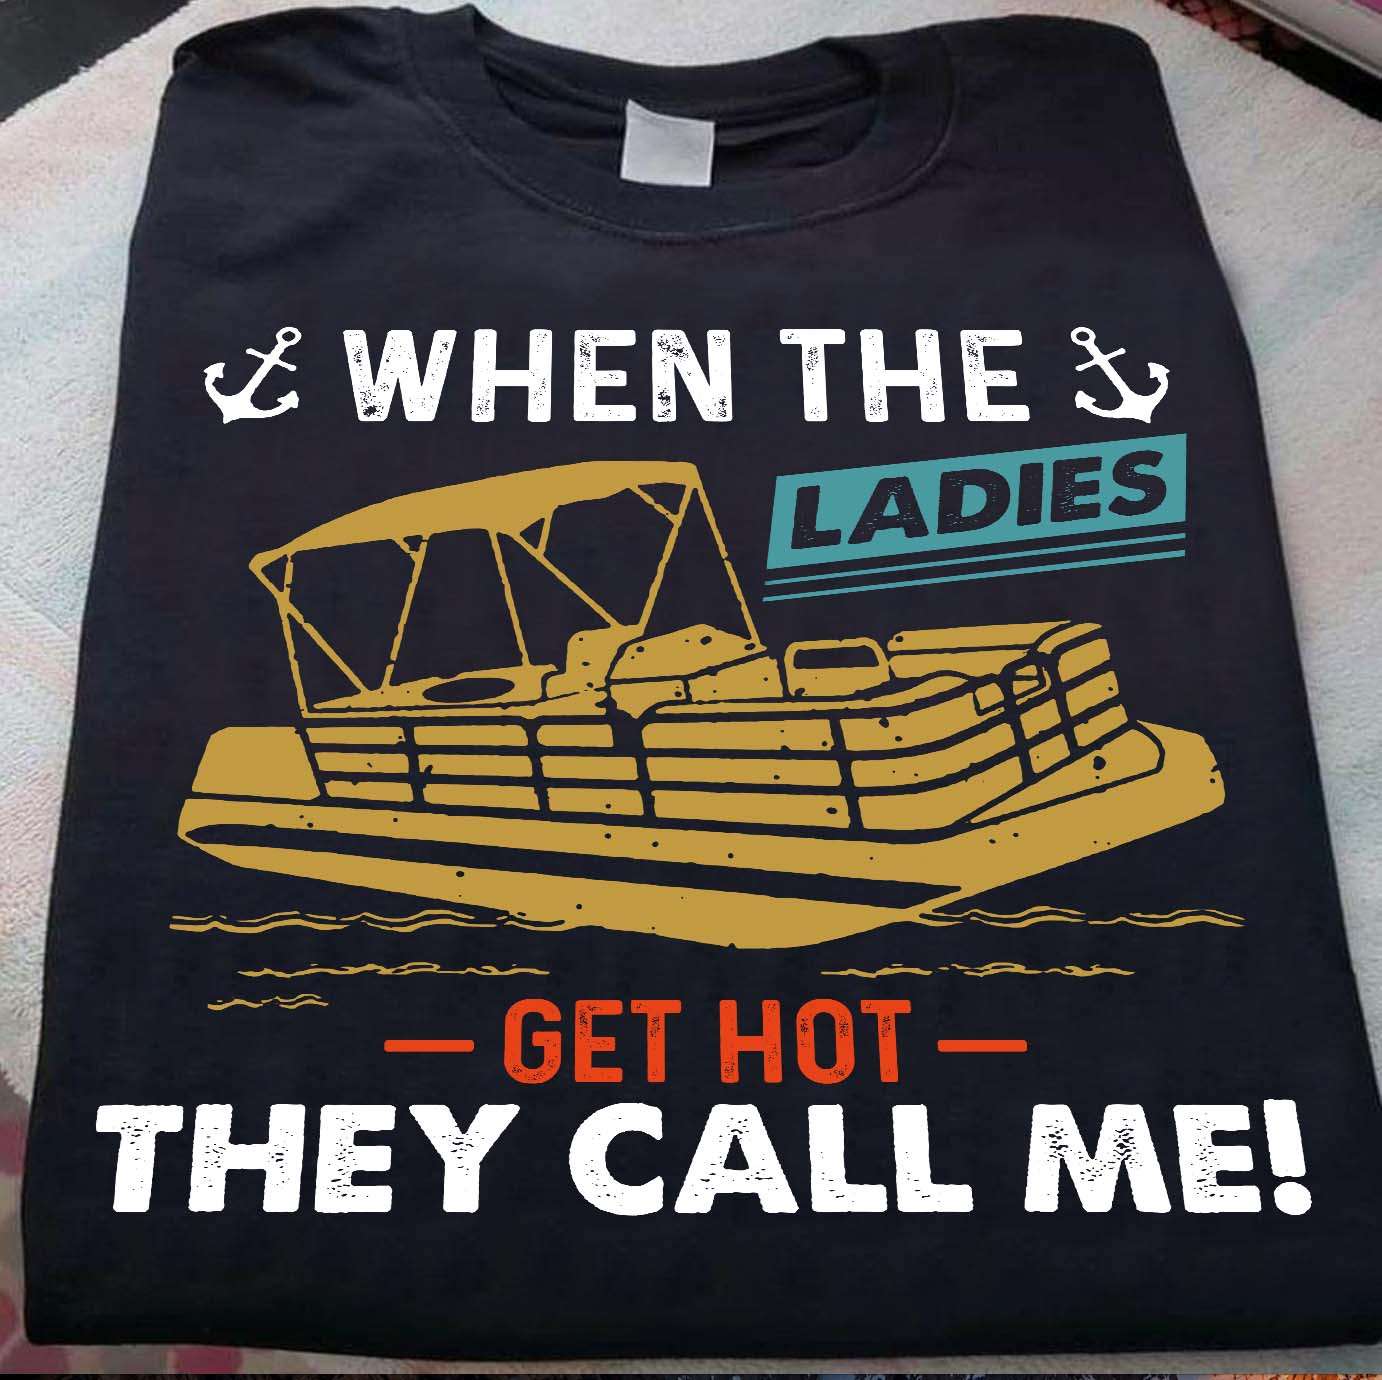 The Potoon Boat - When the ladies get hot they call me